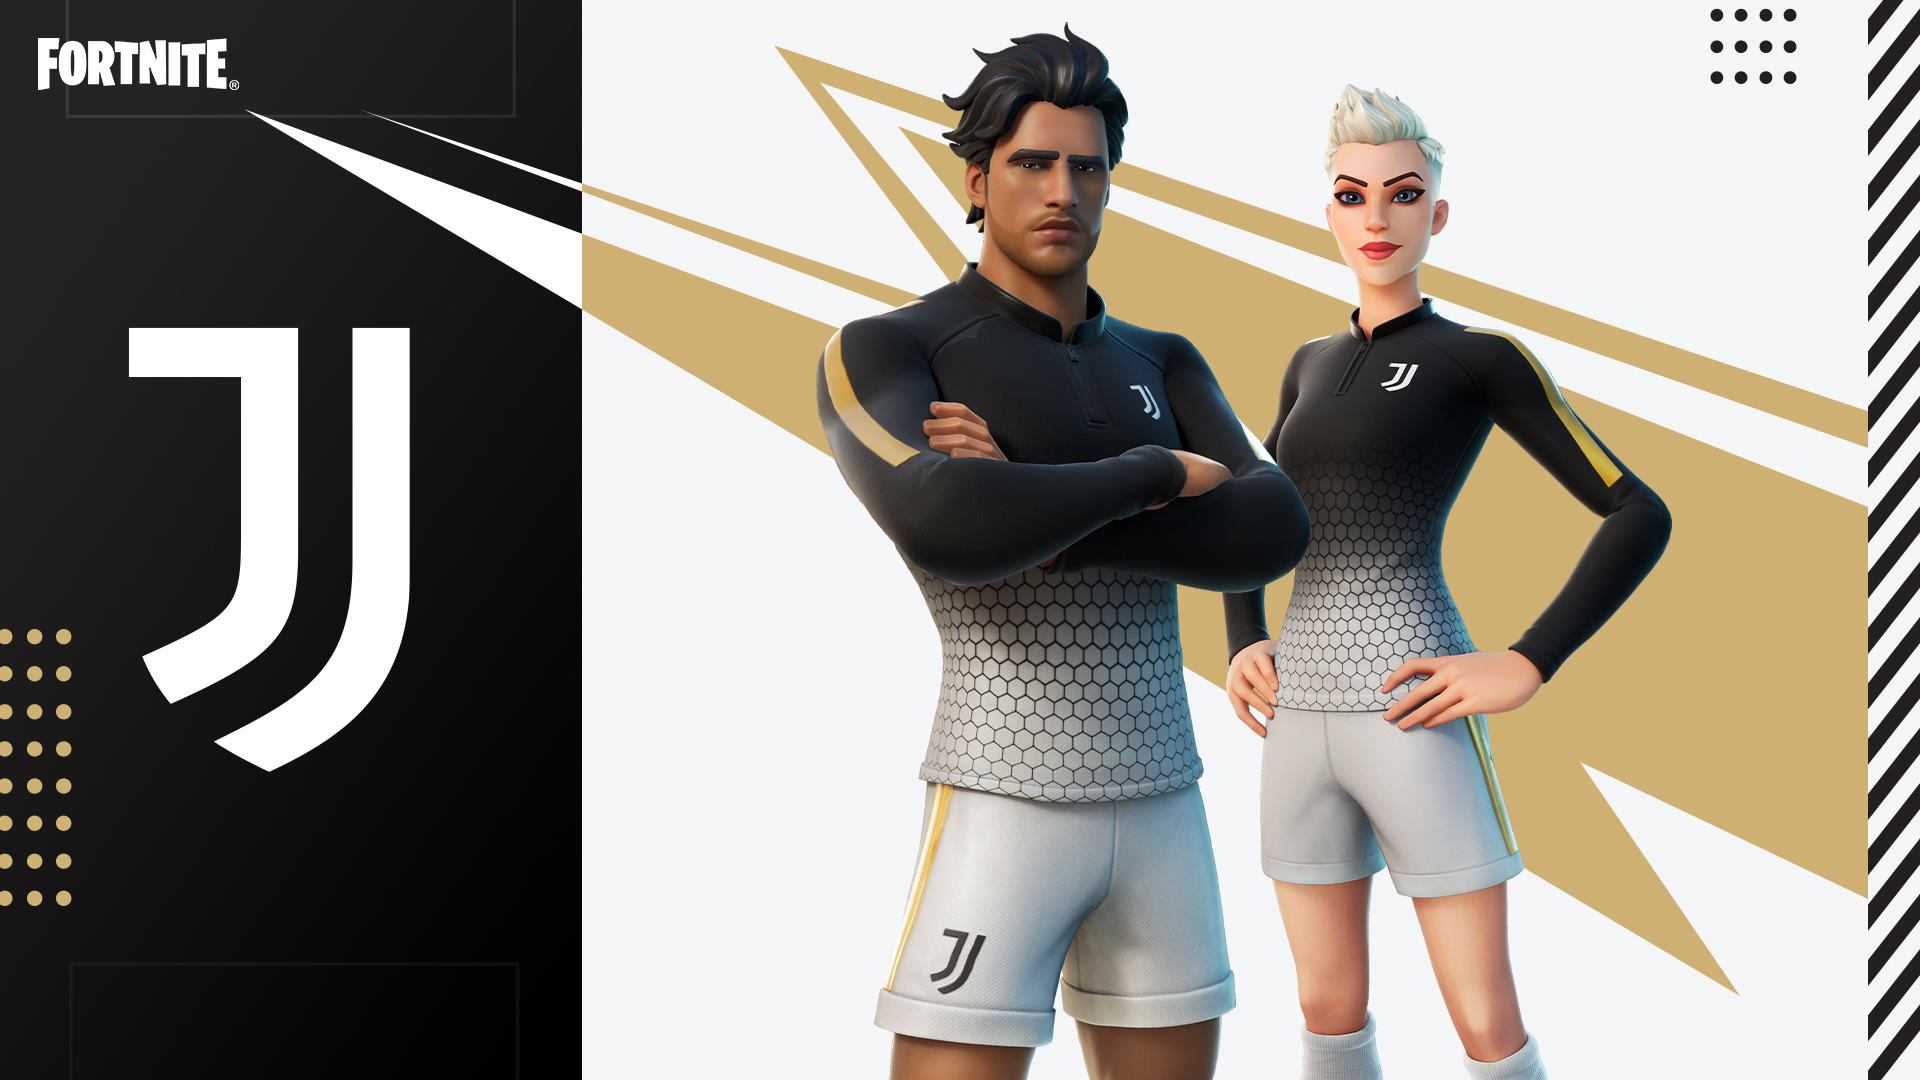 FORTNITE RELEASES NEW FOOTBALL SKINS IN MULTI CLUB DEAL THAT INCLUDES